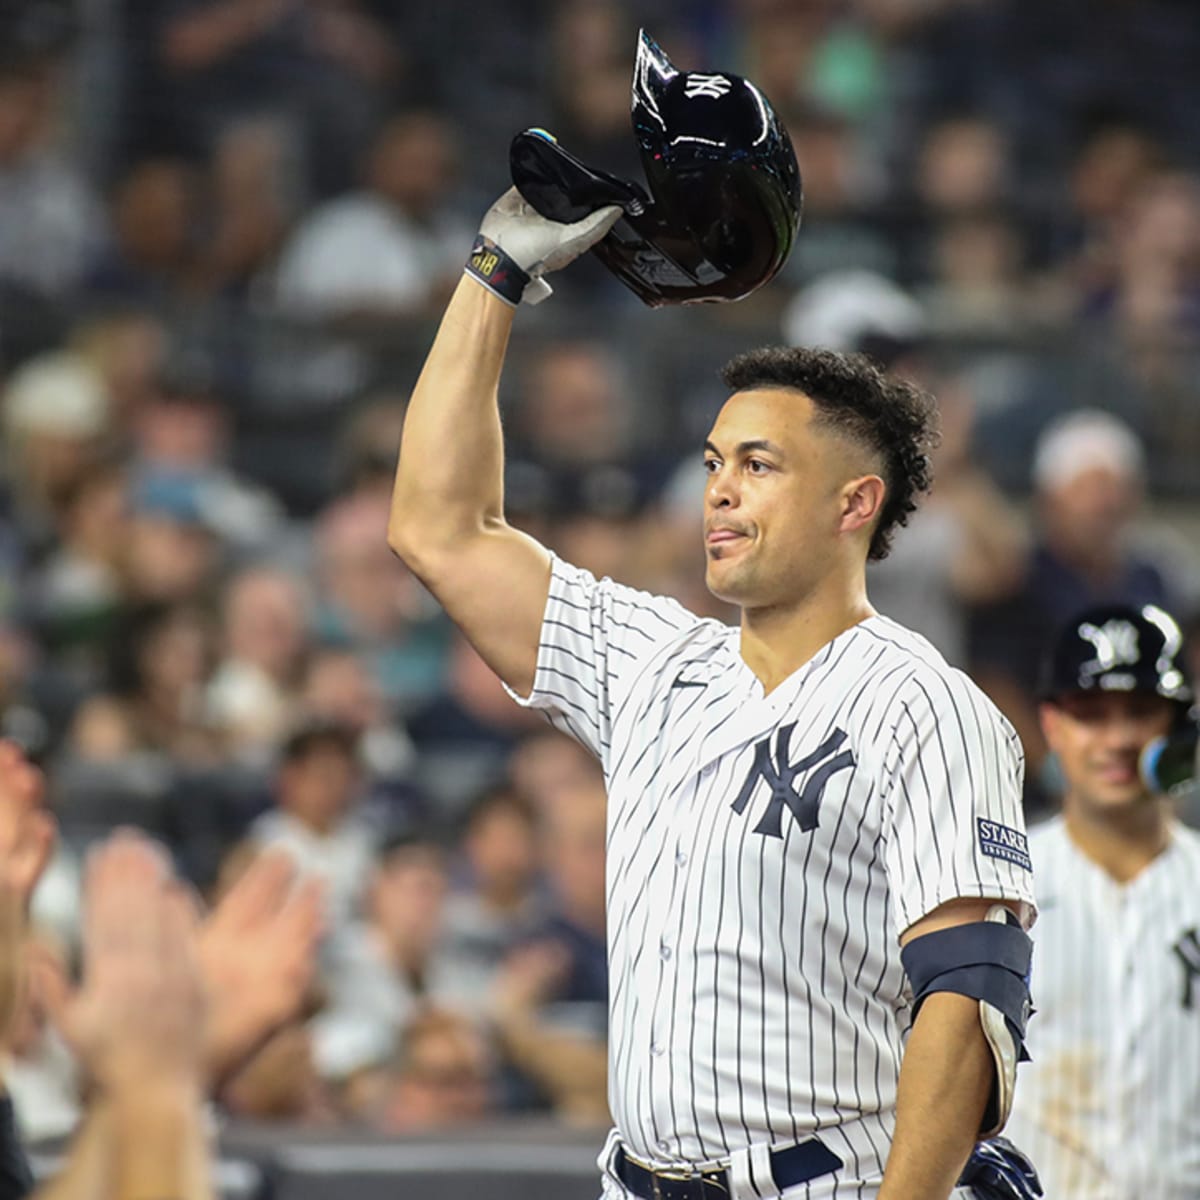 Rangers rumors: Texas asks Marlins about Giancarlo Stanton every